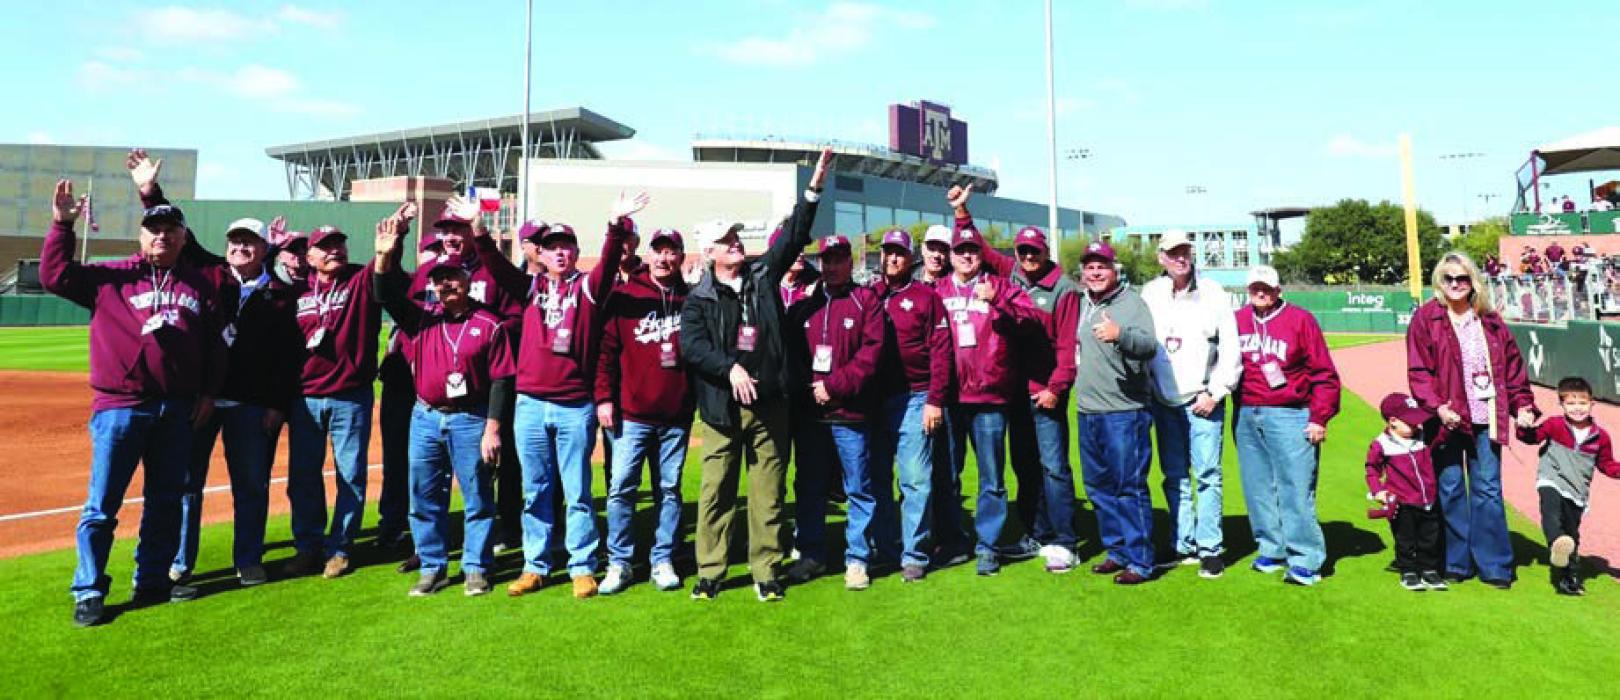 On Saturday March 9, members of the 1974 Texas A&amp;M baseball team were recognized during the Texas A&amp;M vs. Rhode Island ball game in College Station. After 50 years, the team still holds the A&amp;M record for the highest team batting average of .342. A couple of area ballplayers were members of the ‘74 team. Columbus native David Buxkamper (4th from the left) and John ‘Bubba’ Riehs (3rd from the left) of La Grange.